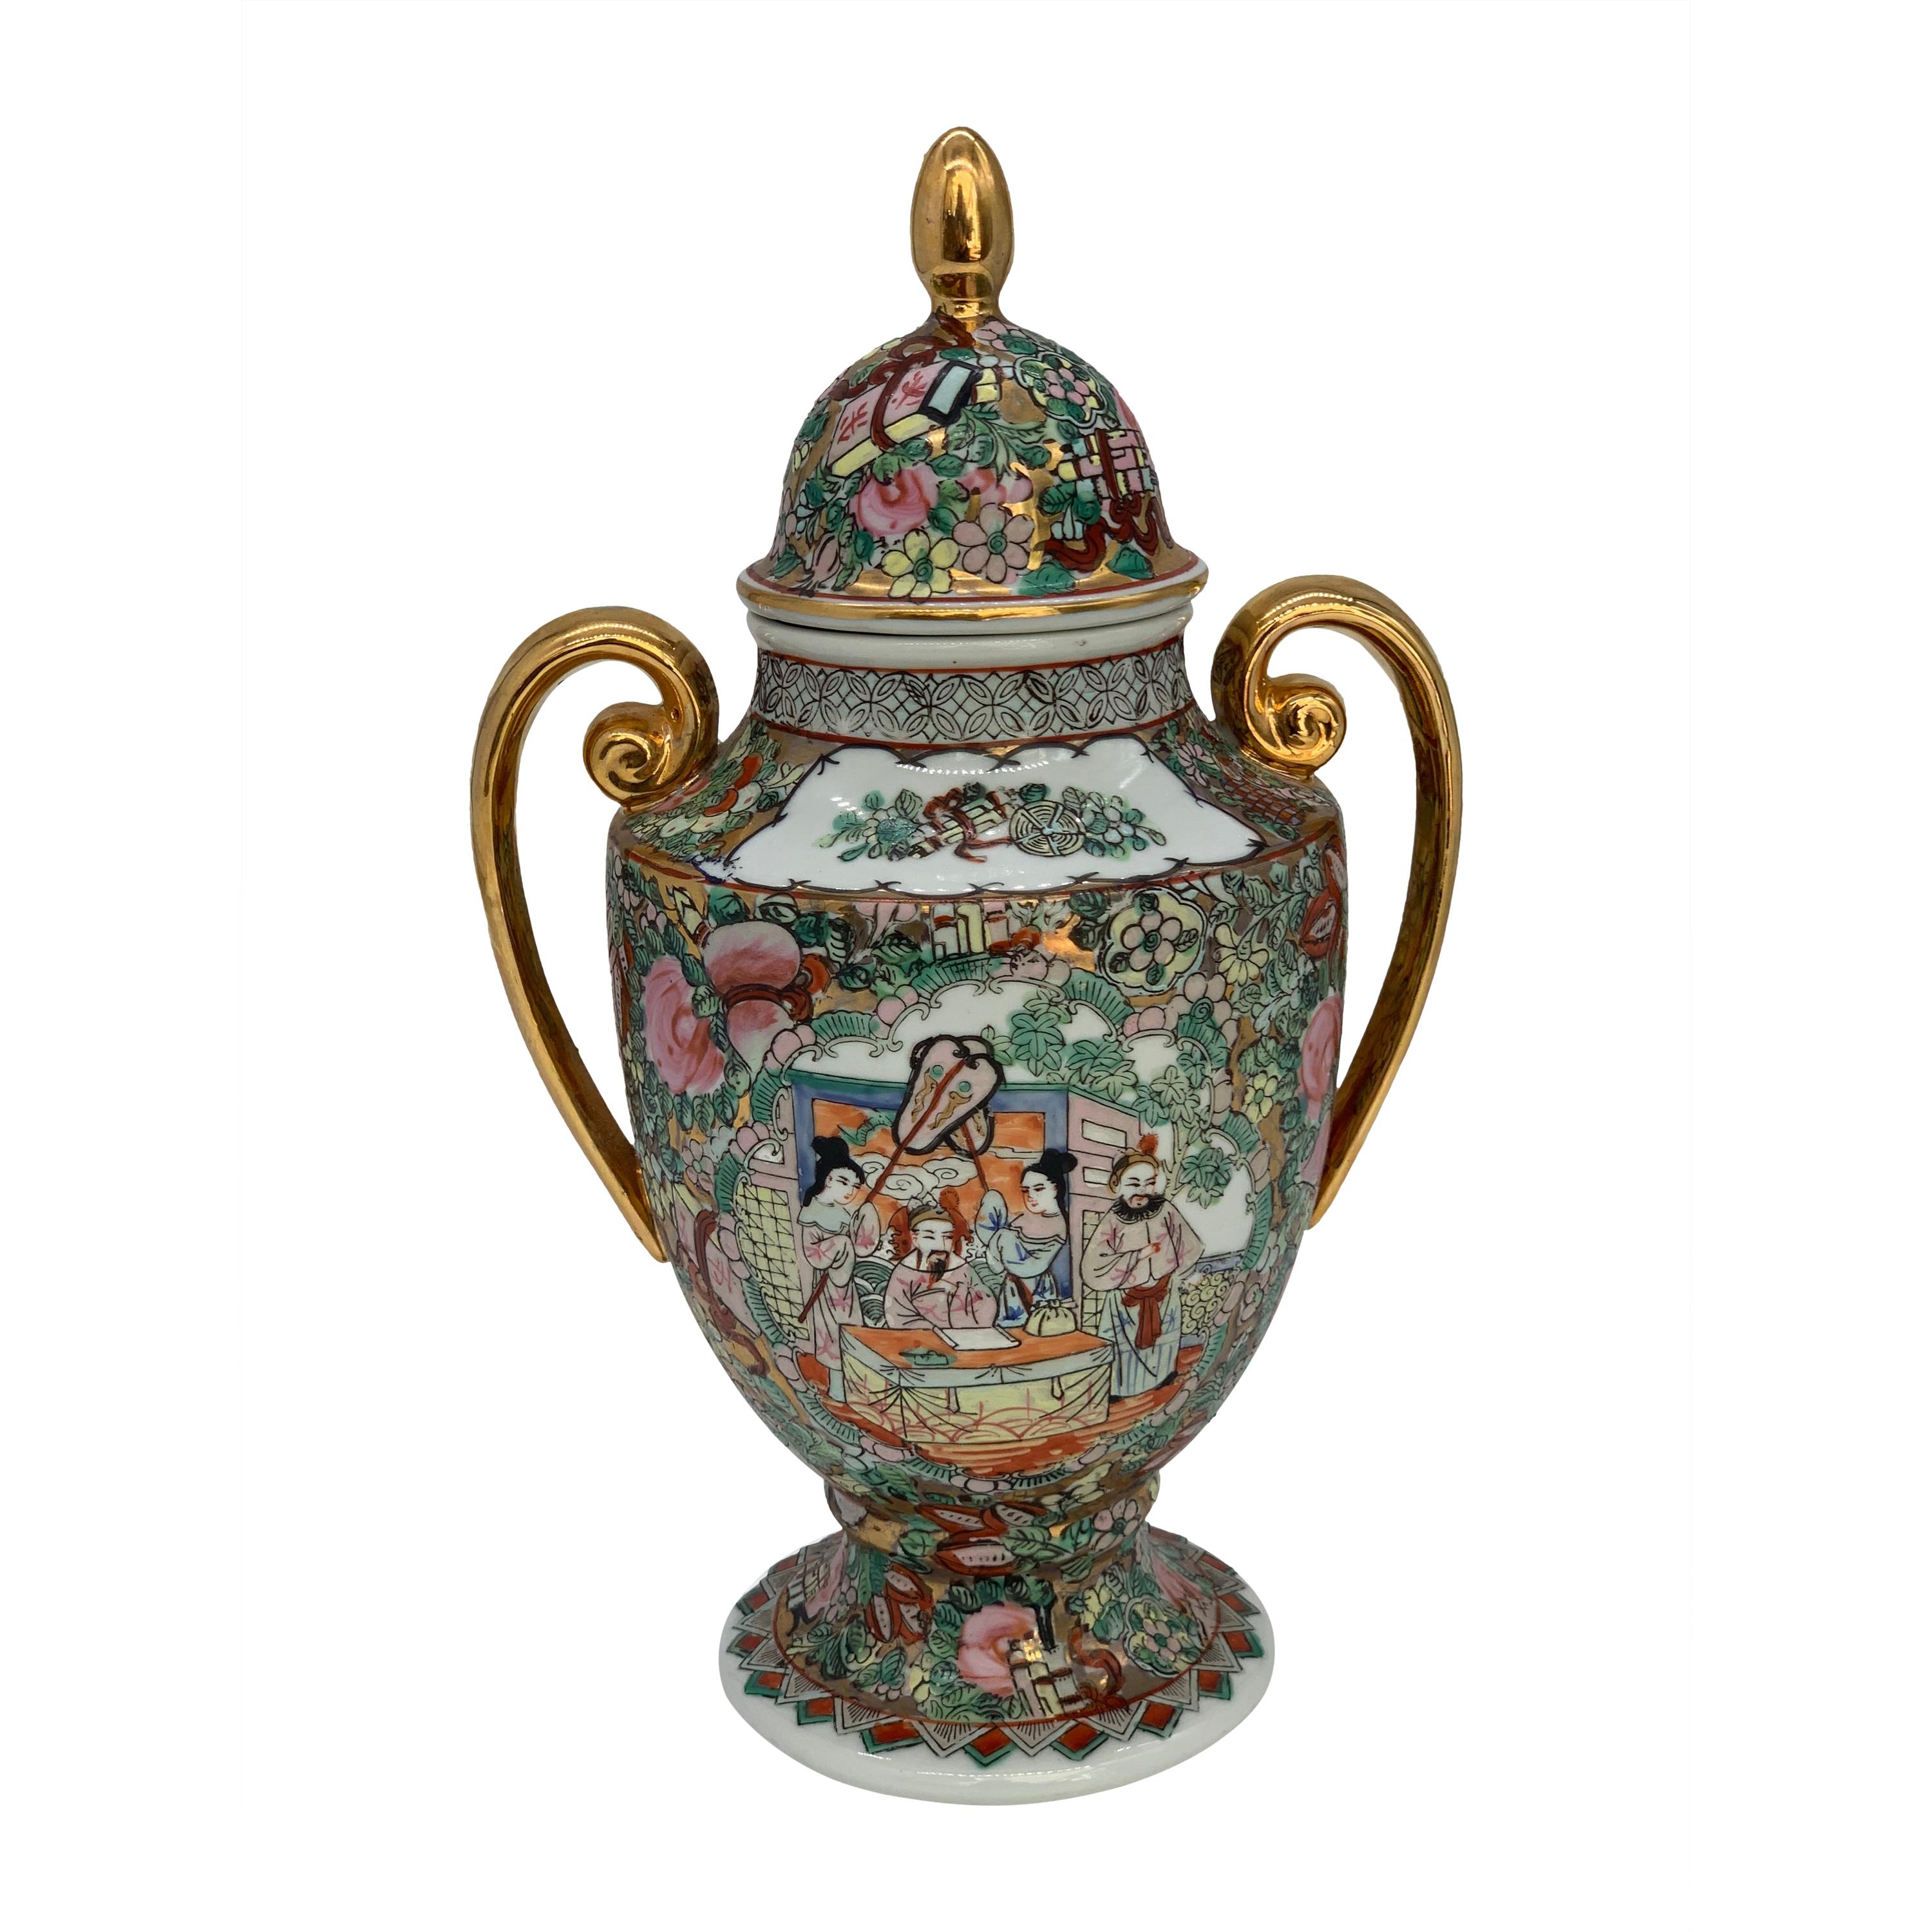 Chinese Famille Rose Vases with Gilt Handles 19th Century Figurative Scenes